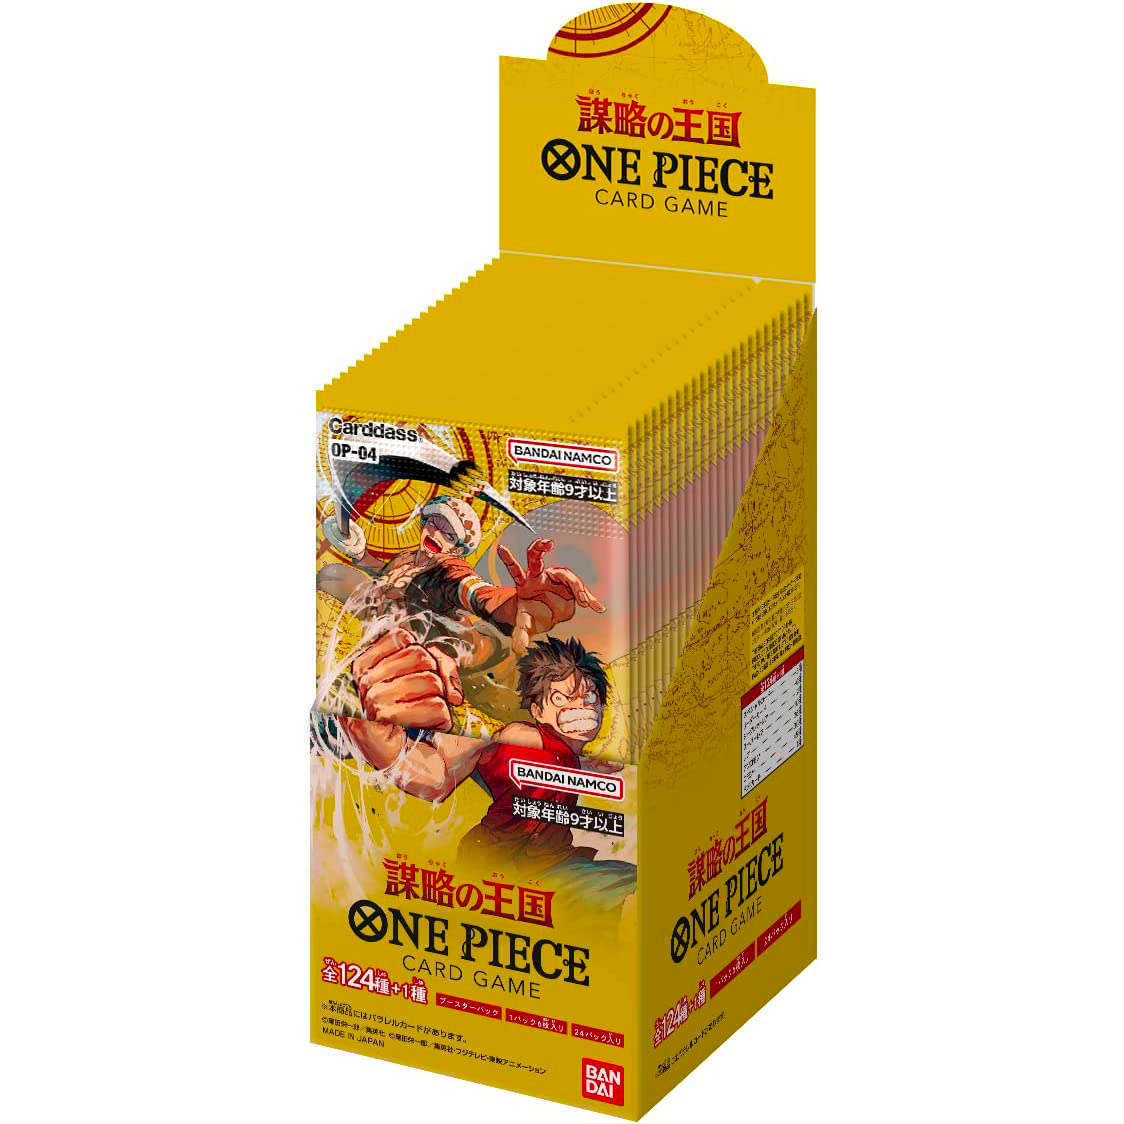 [OP-04] ONE PIECE CARD GAME Booster Pack ｢Kingdoms of Intrigue｣ Box